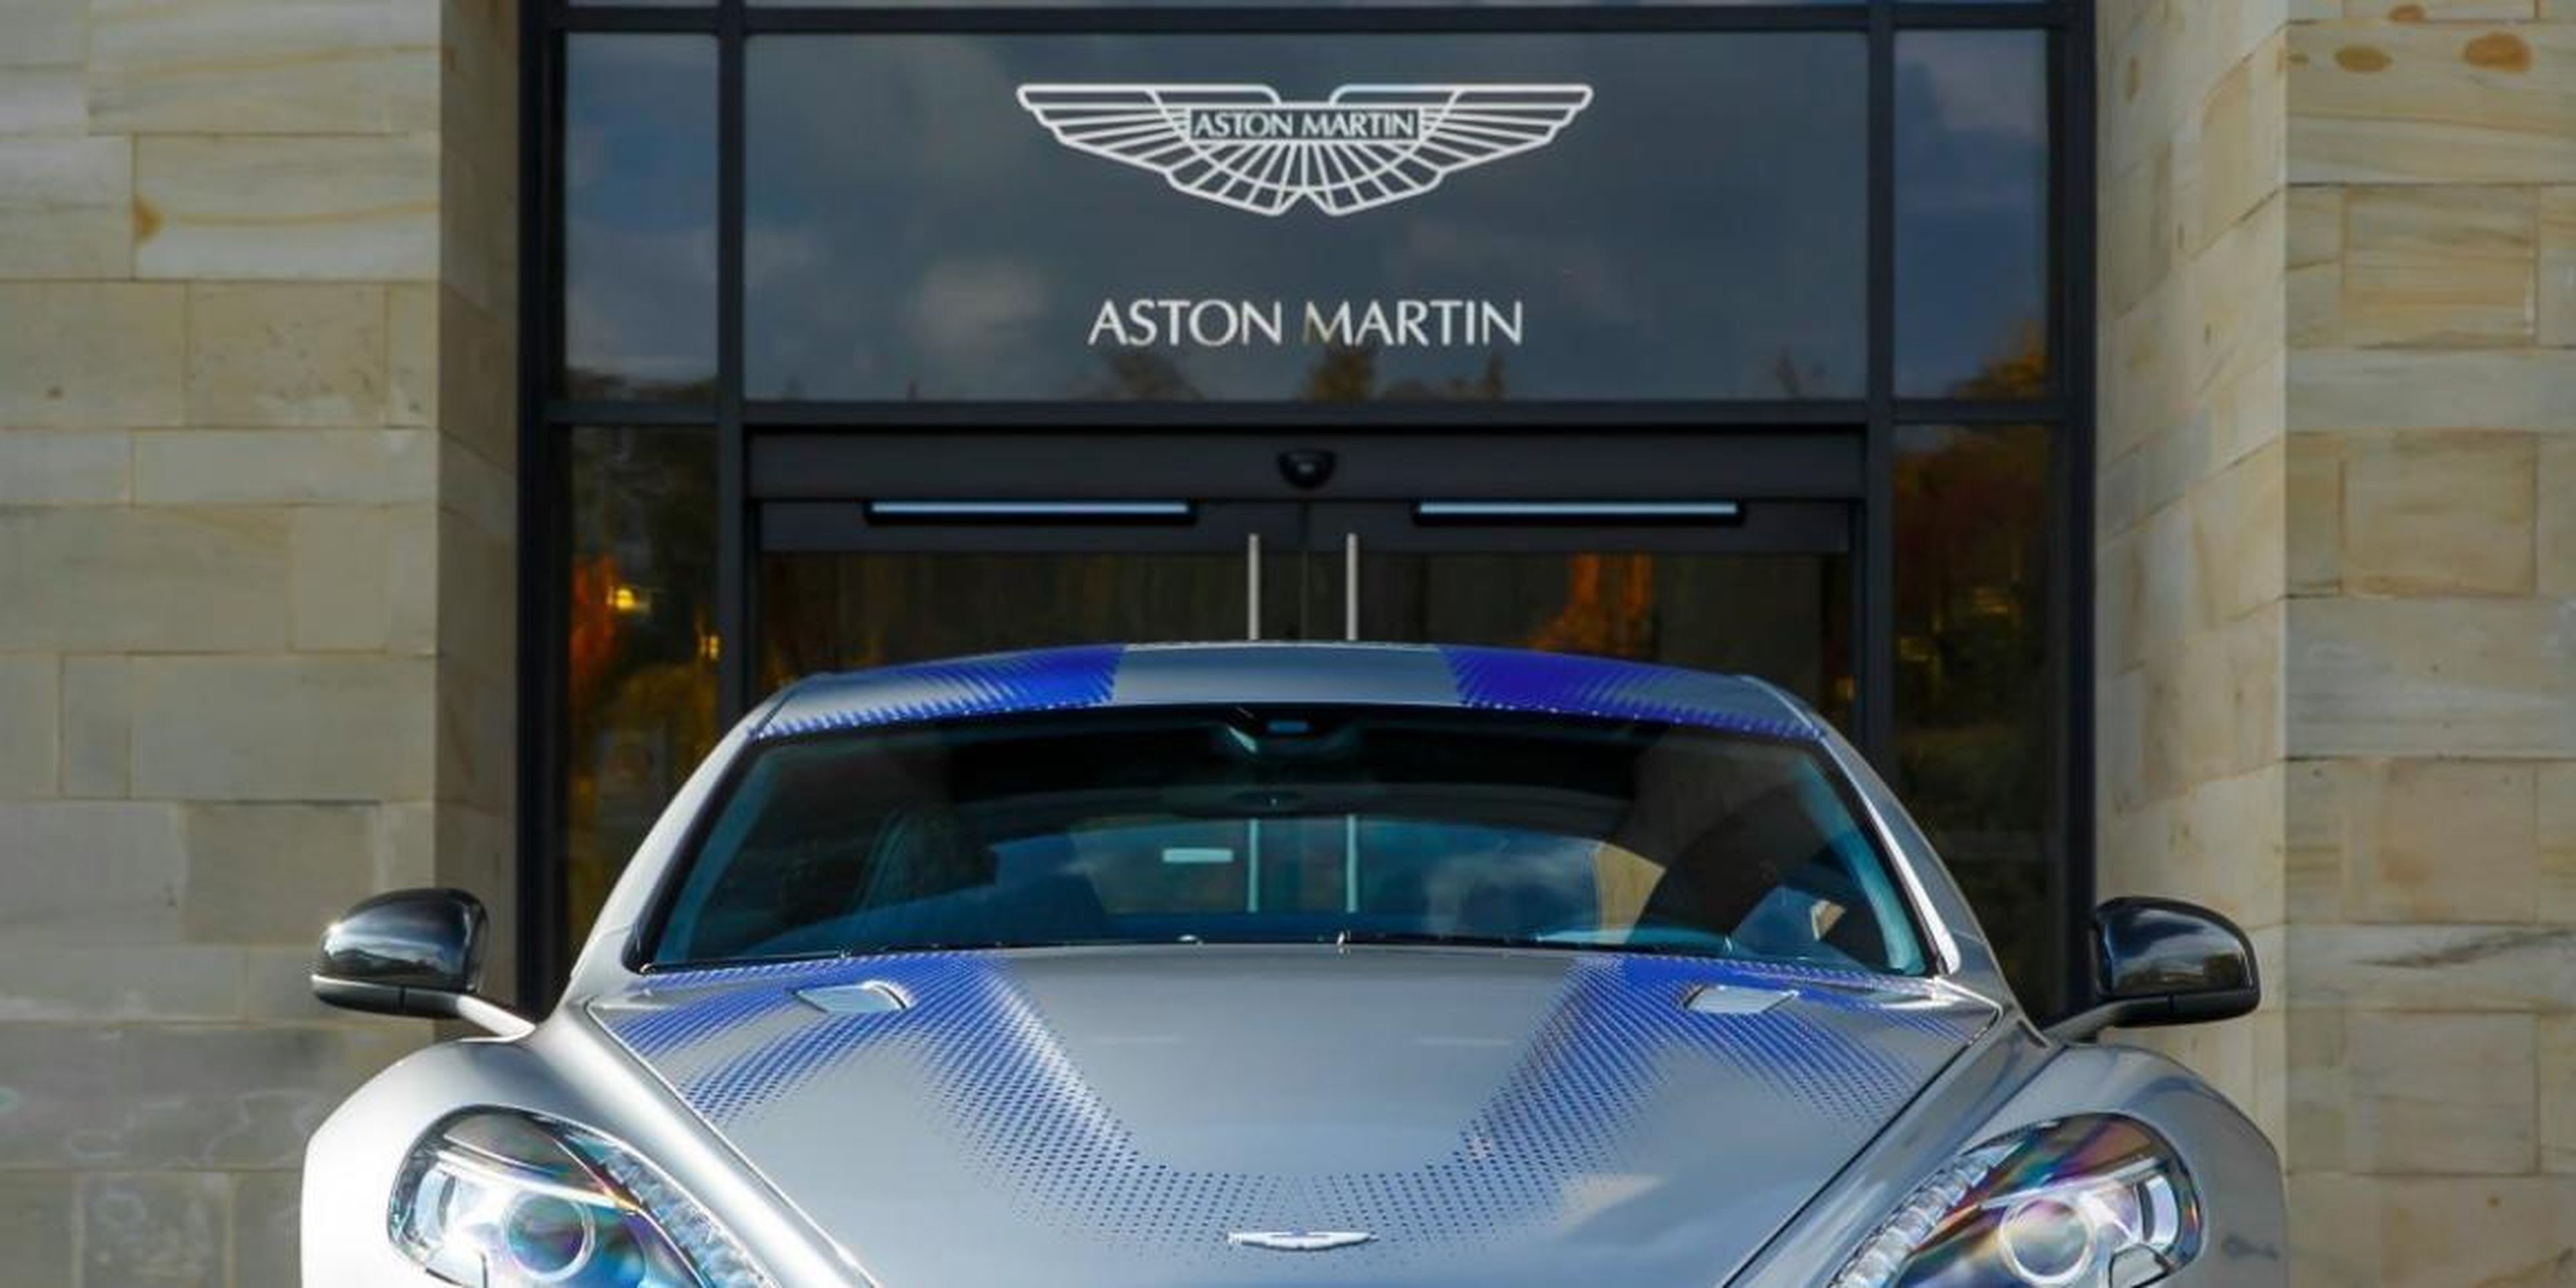 Aston Martin is finally launching an IPO — and is set to be valued at $6.5 billion